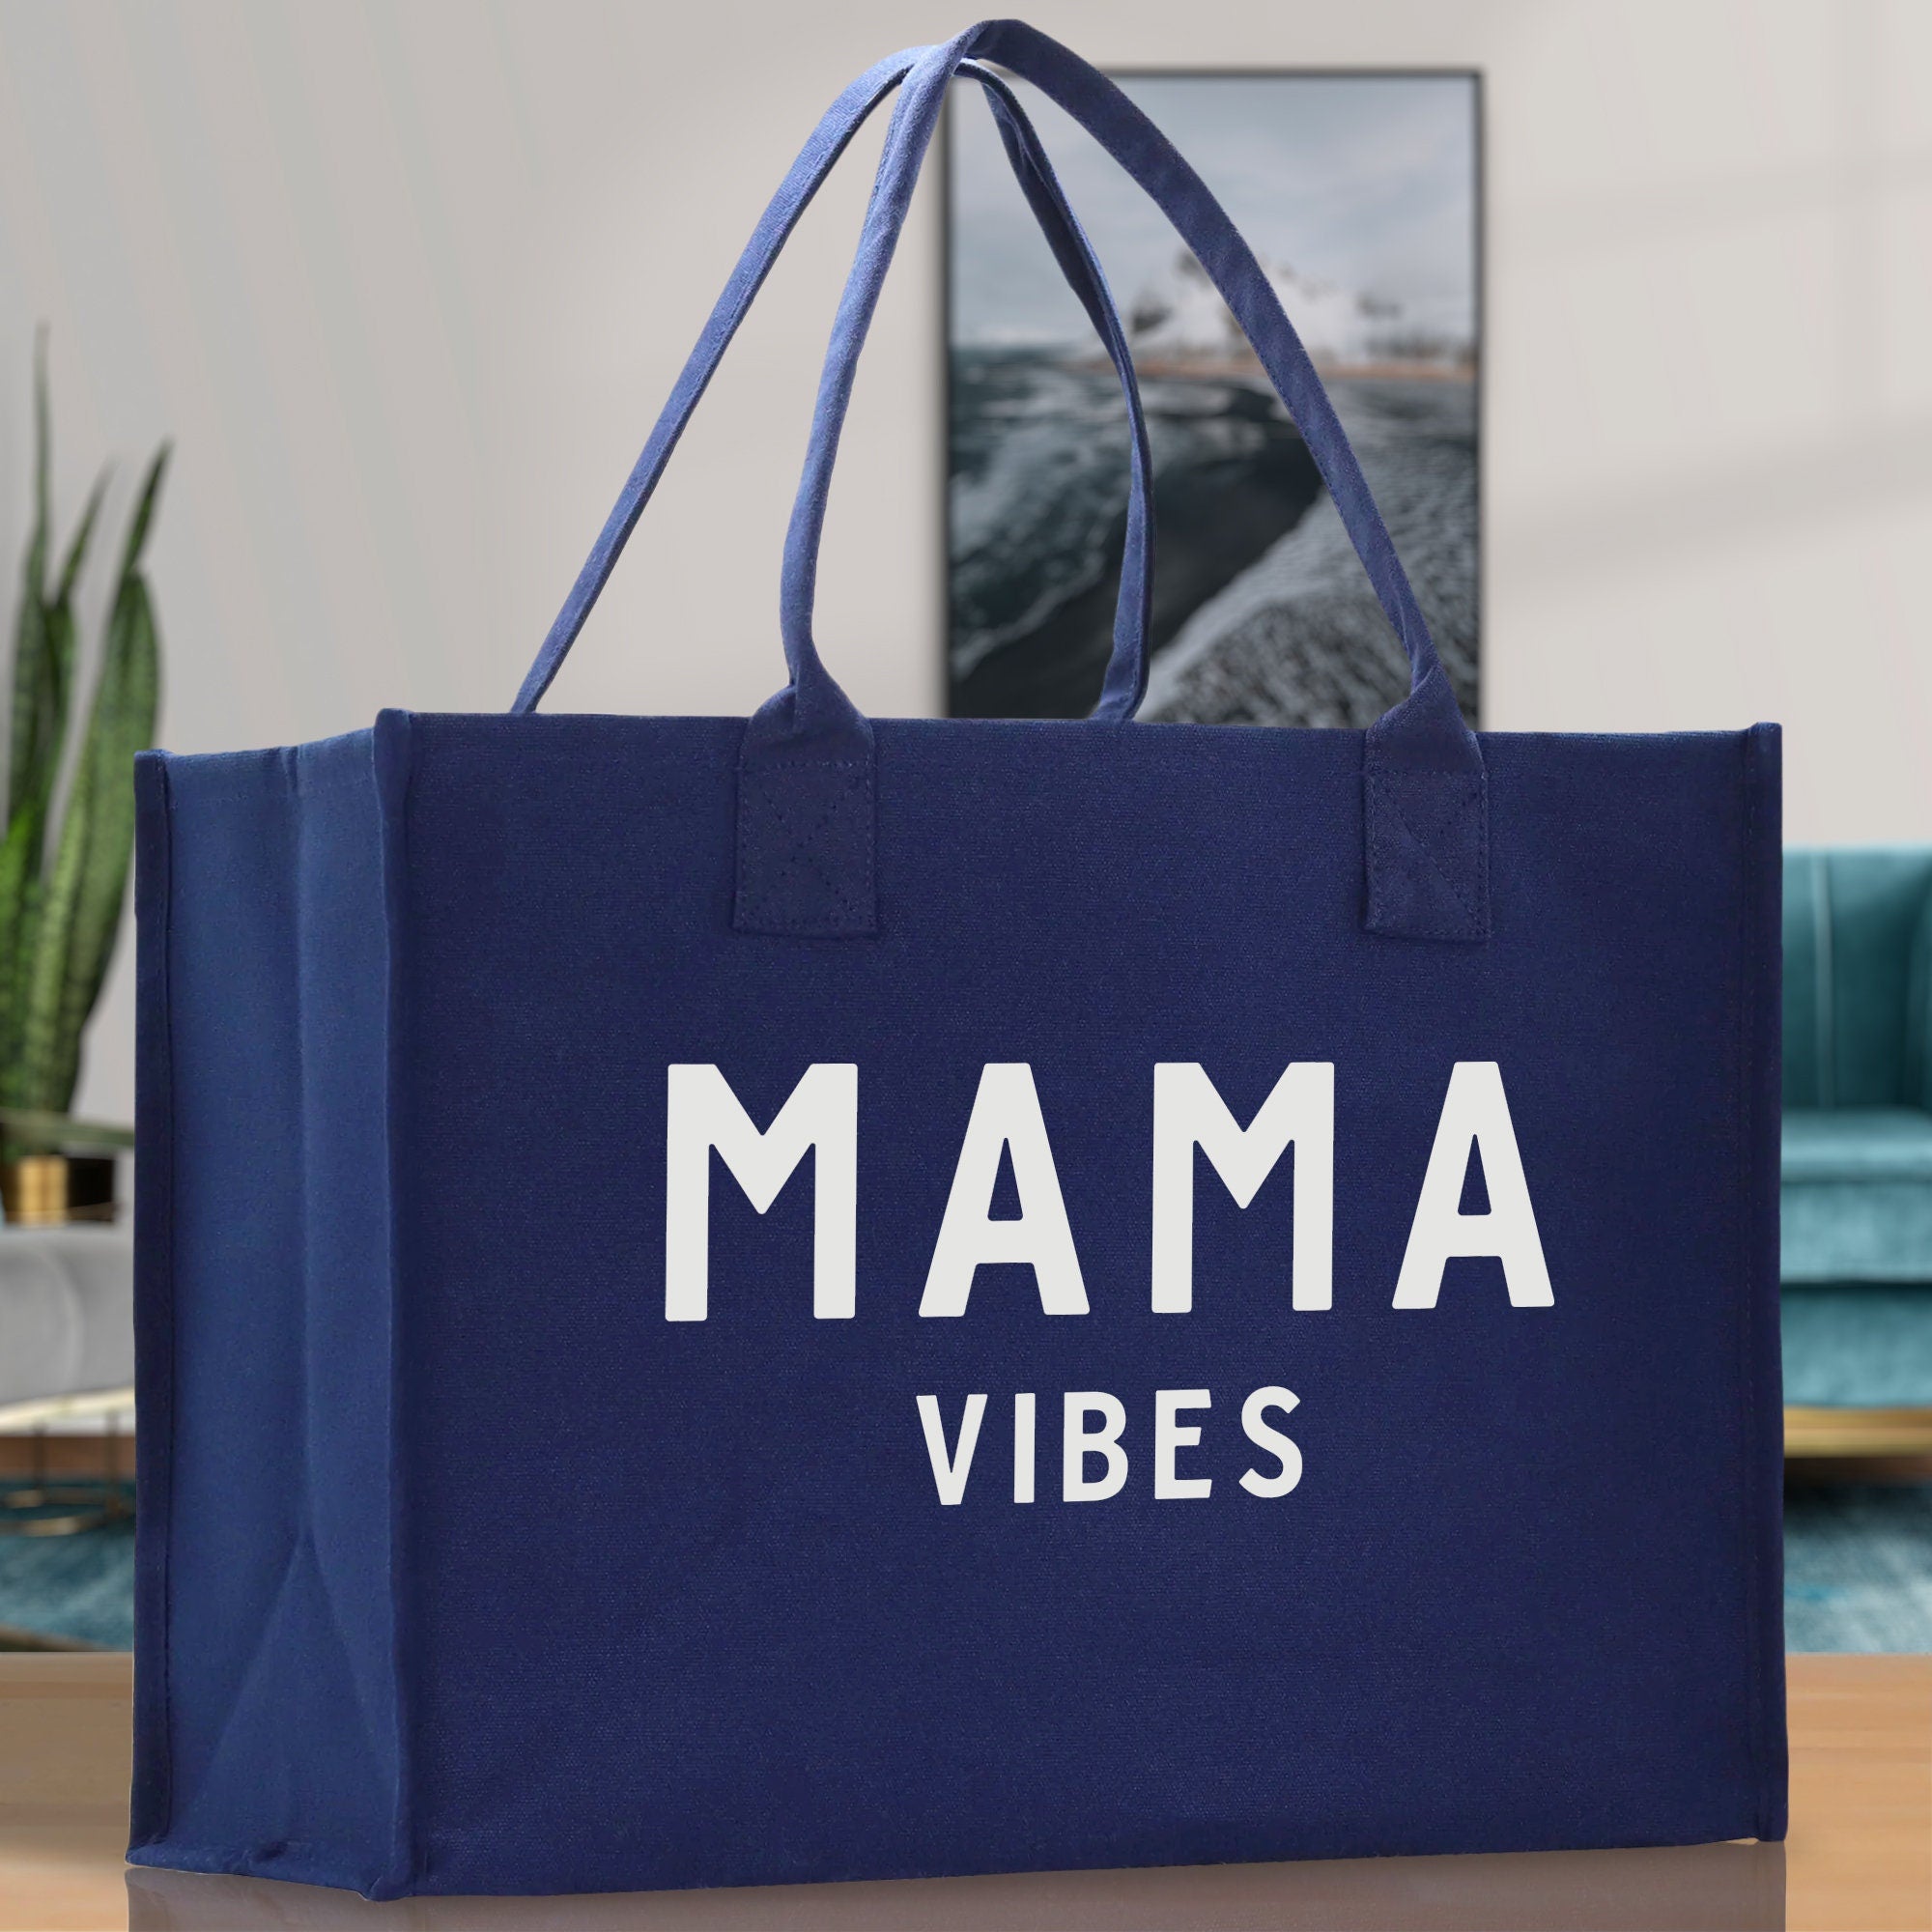 Mama Vibes Cotton Canvas Chic Beach Tote Bag Multipurpose Tote Weekender Tote Gift for Her Outdoor Tote Vacation Tote Large Beach Bag